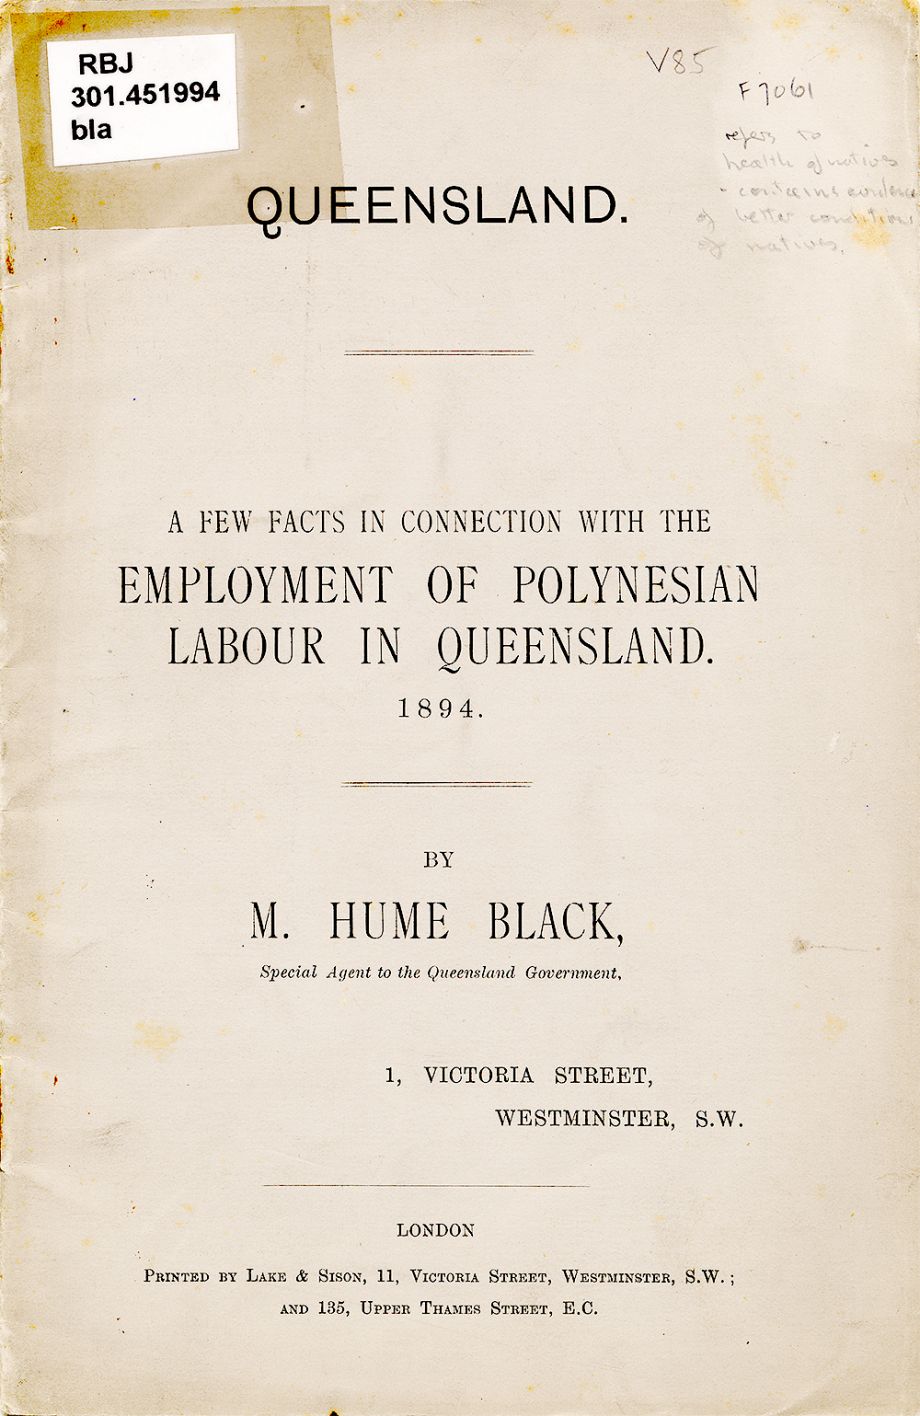 1894 A few facts in connection with the Employment of Polynesian Labour in Queensland. 1894. by M. Hume Black. London : Qld. government :1894 